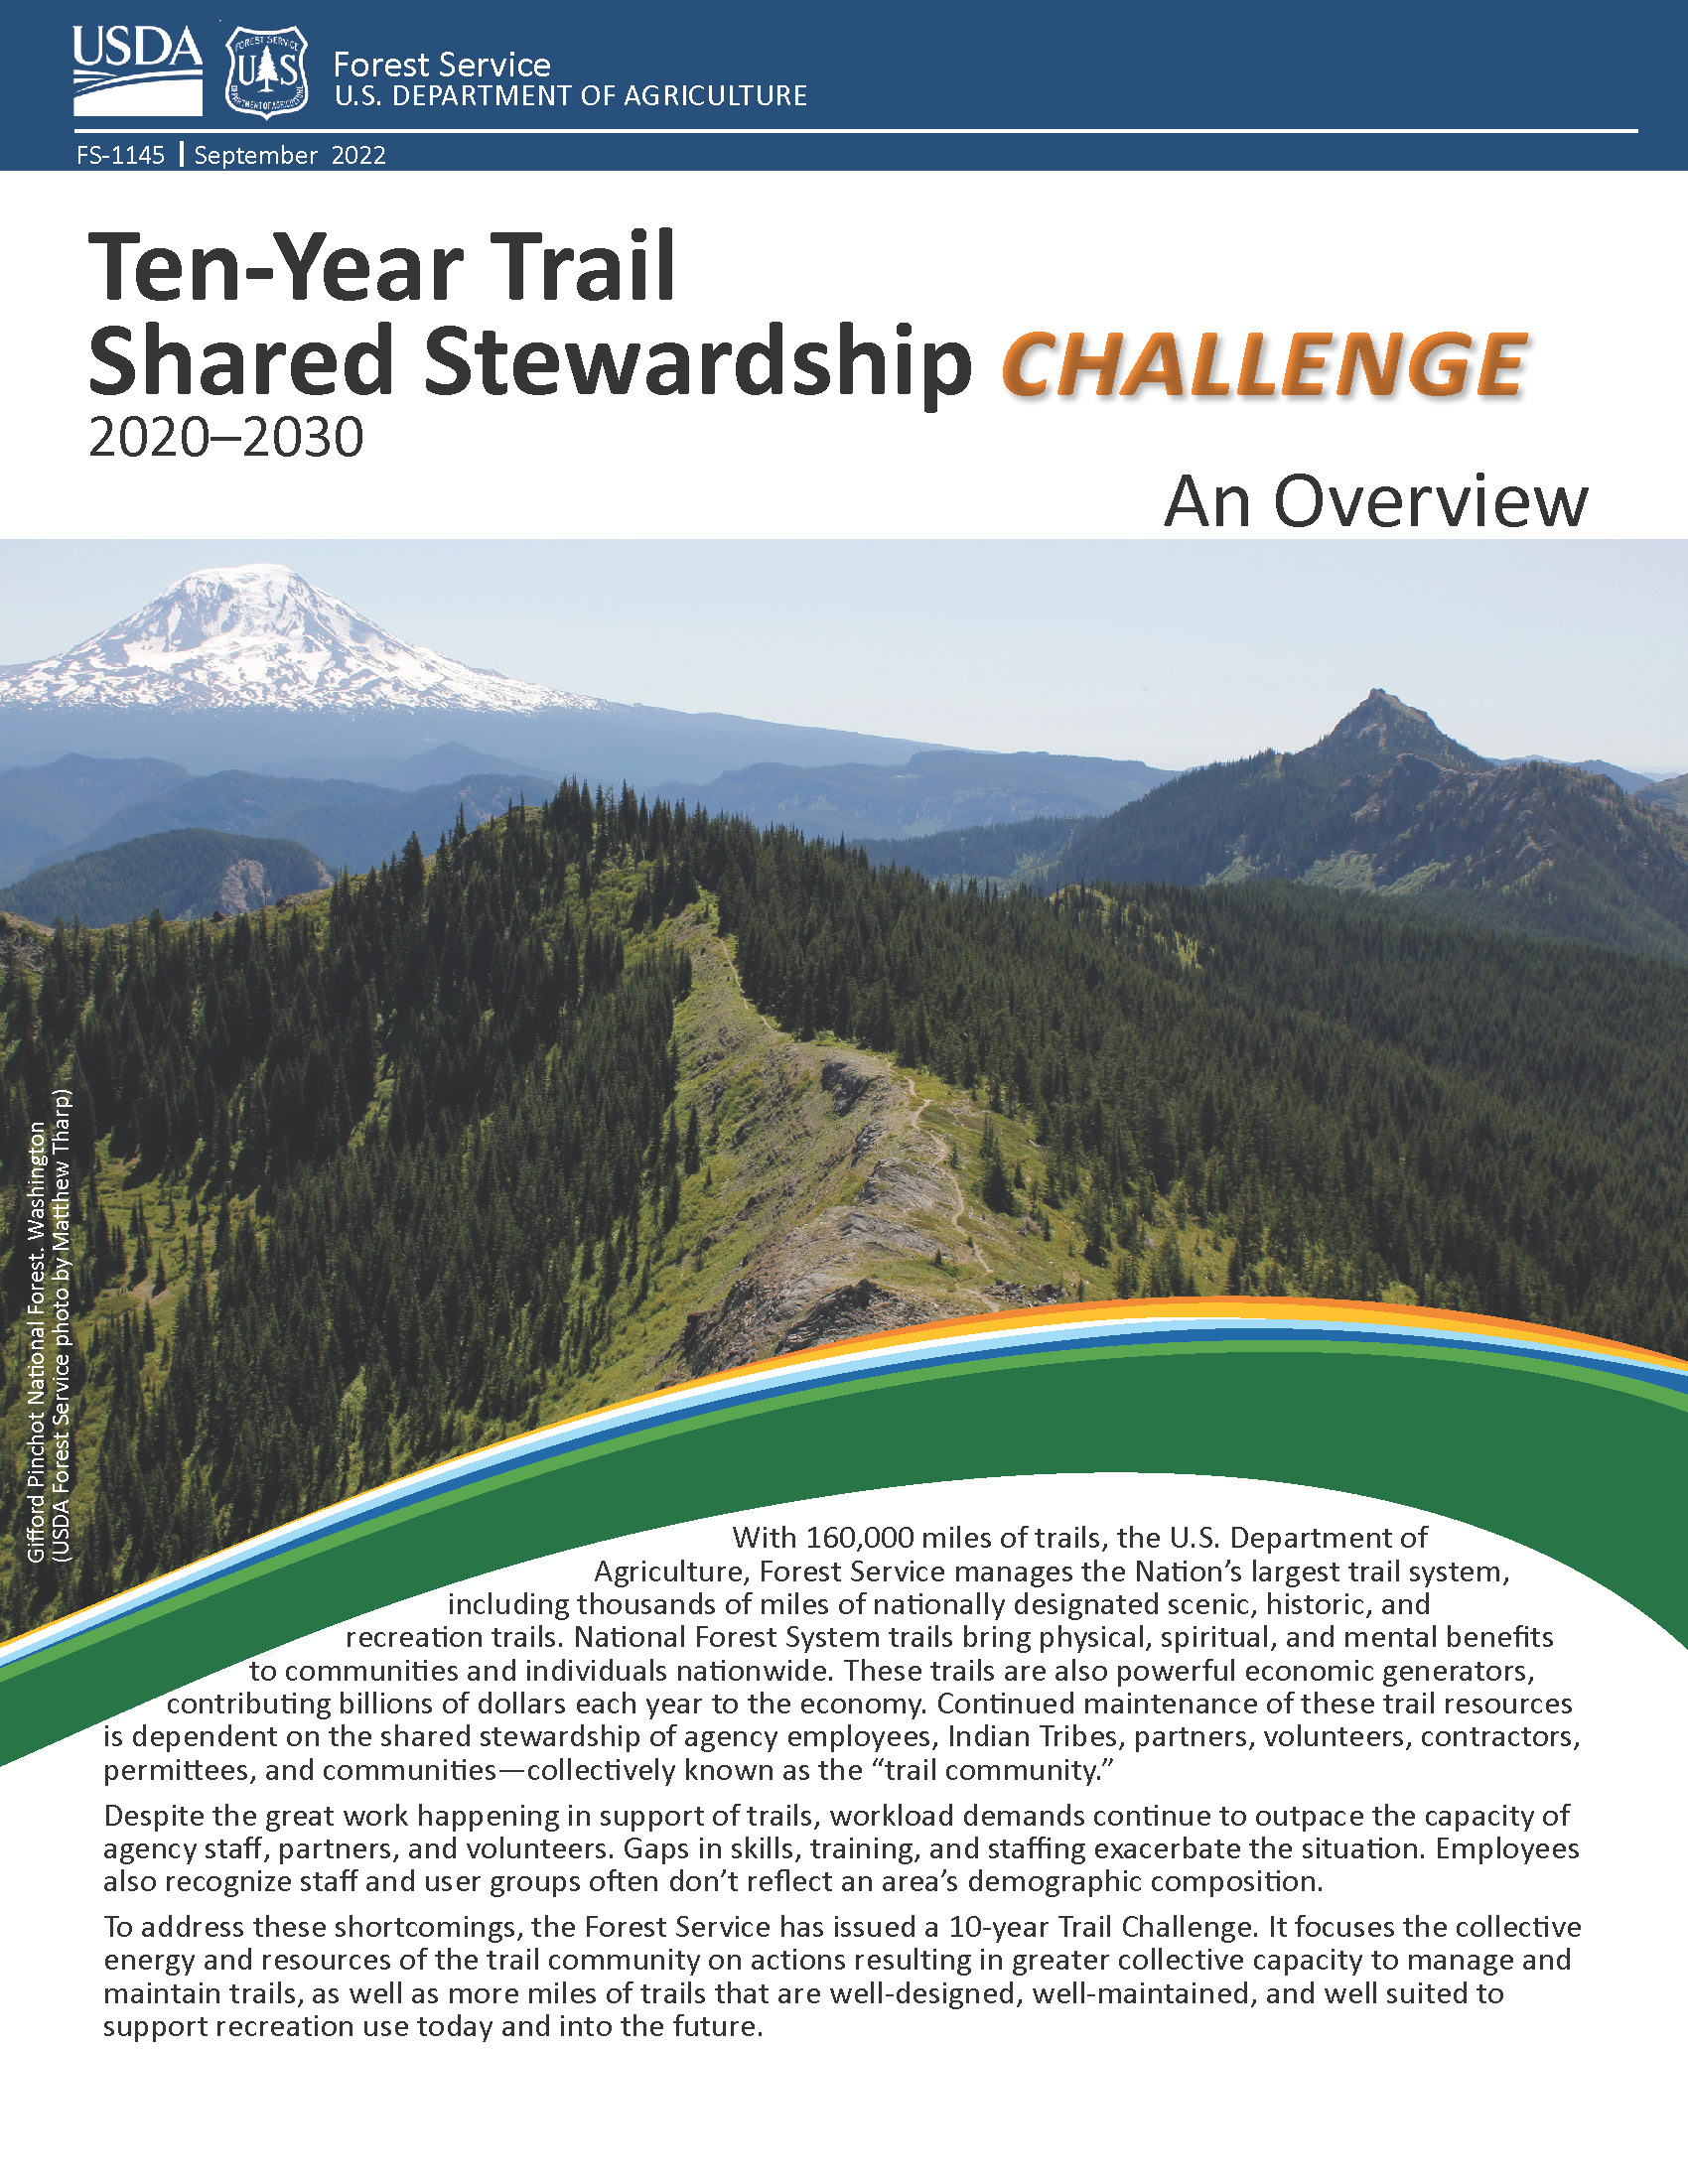 Cover page of 10-Year Trail Shared Stewardship Challenge